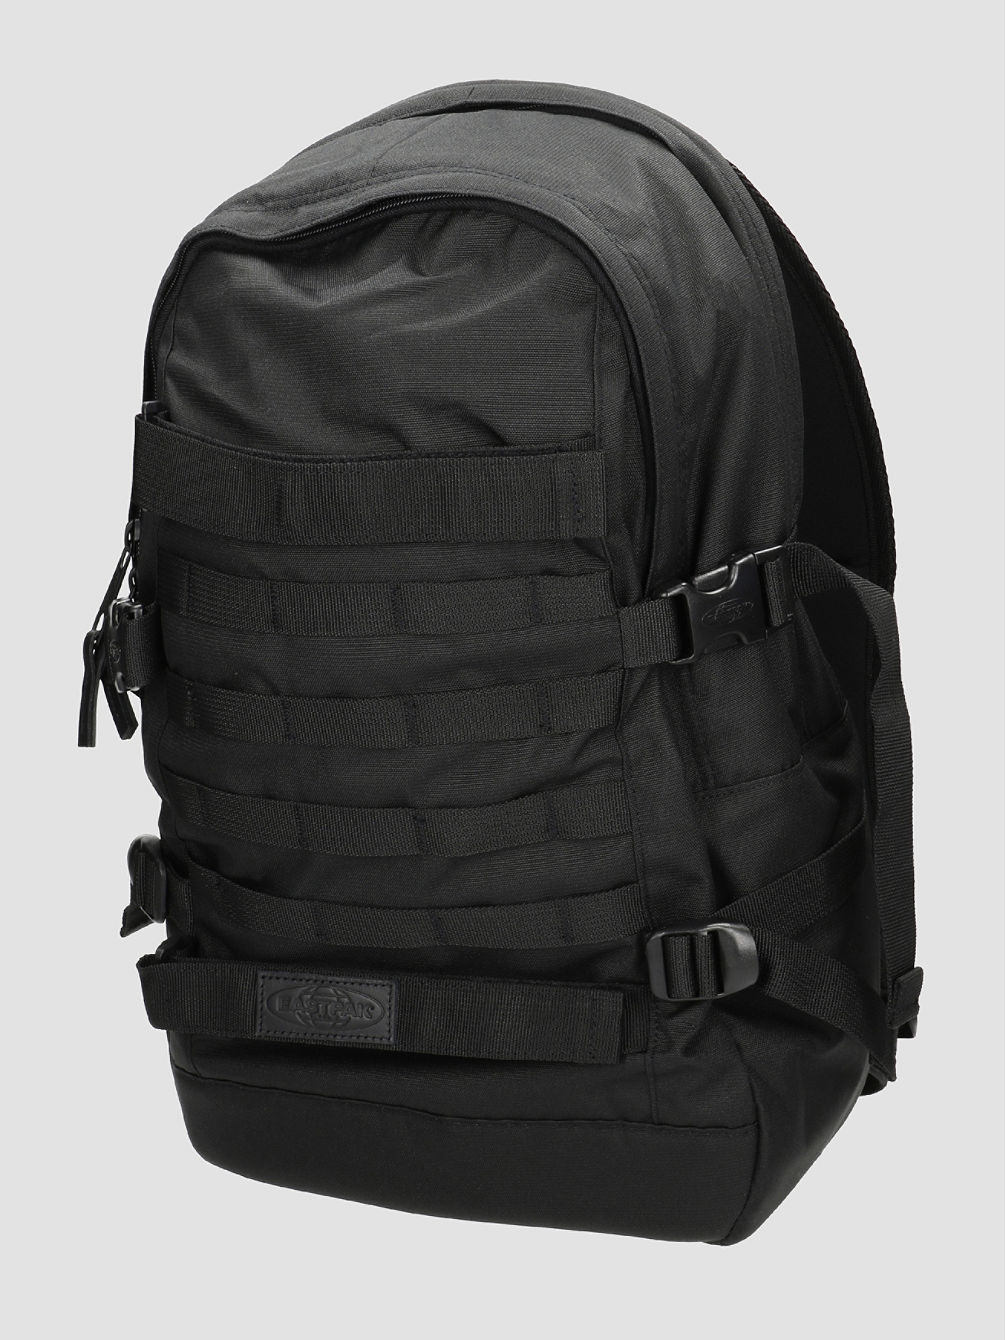 Floid Tact L Backpack